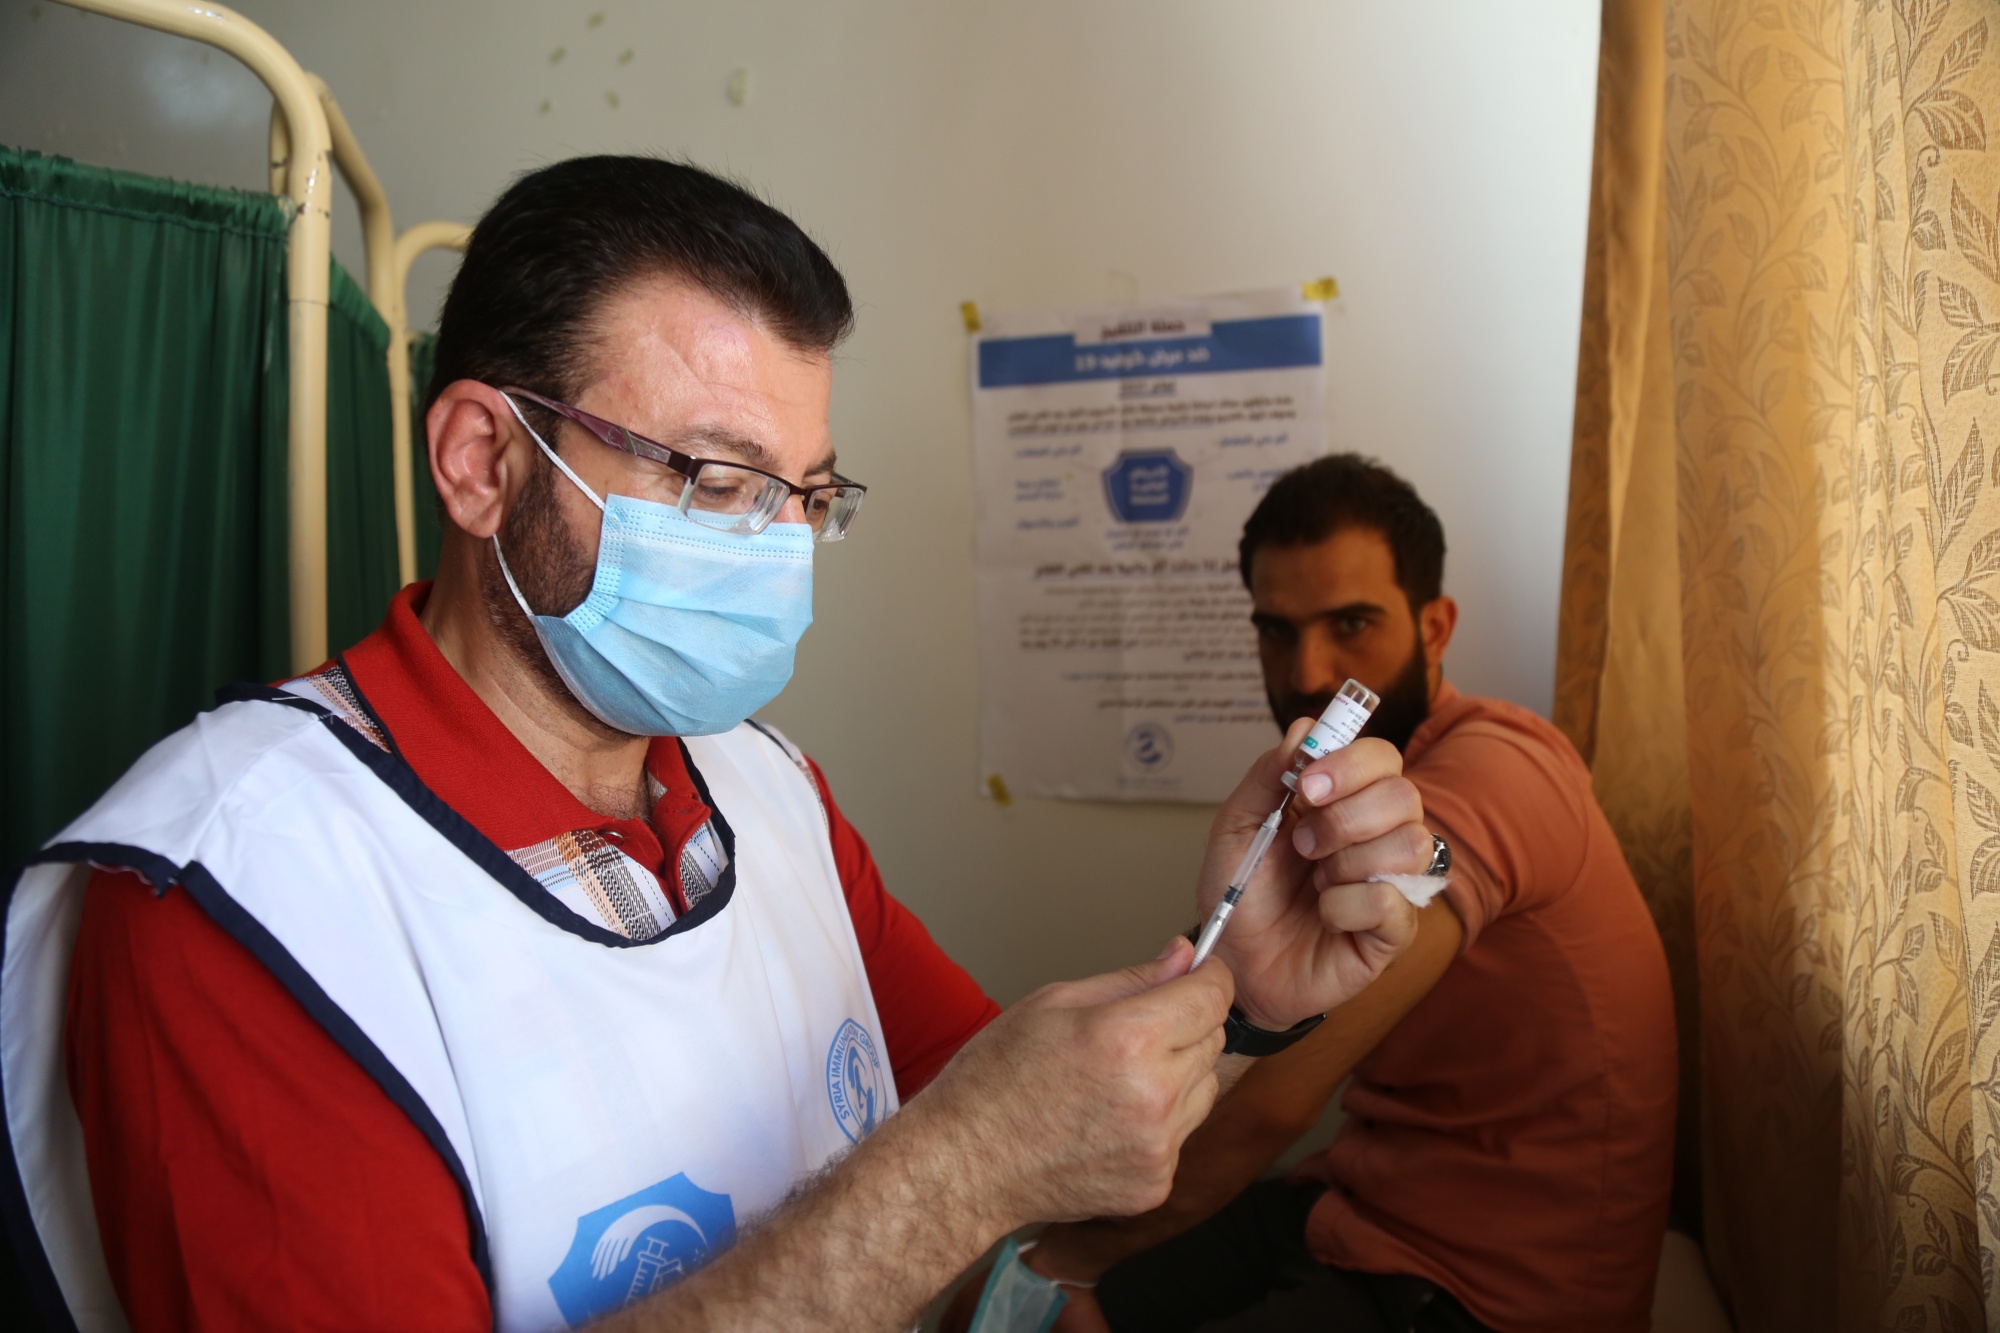 A health care worker administers a vaccine in the Syrian city of Idlib on 26 August (MEE/Ali Haj Suleiman)